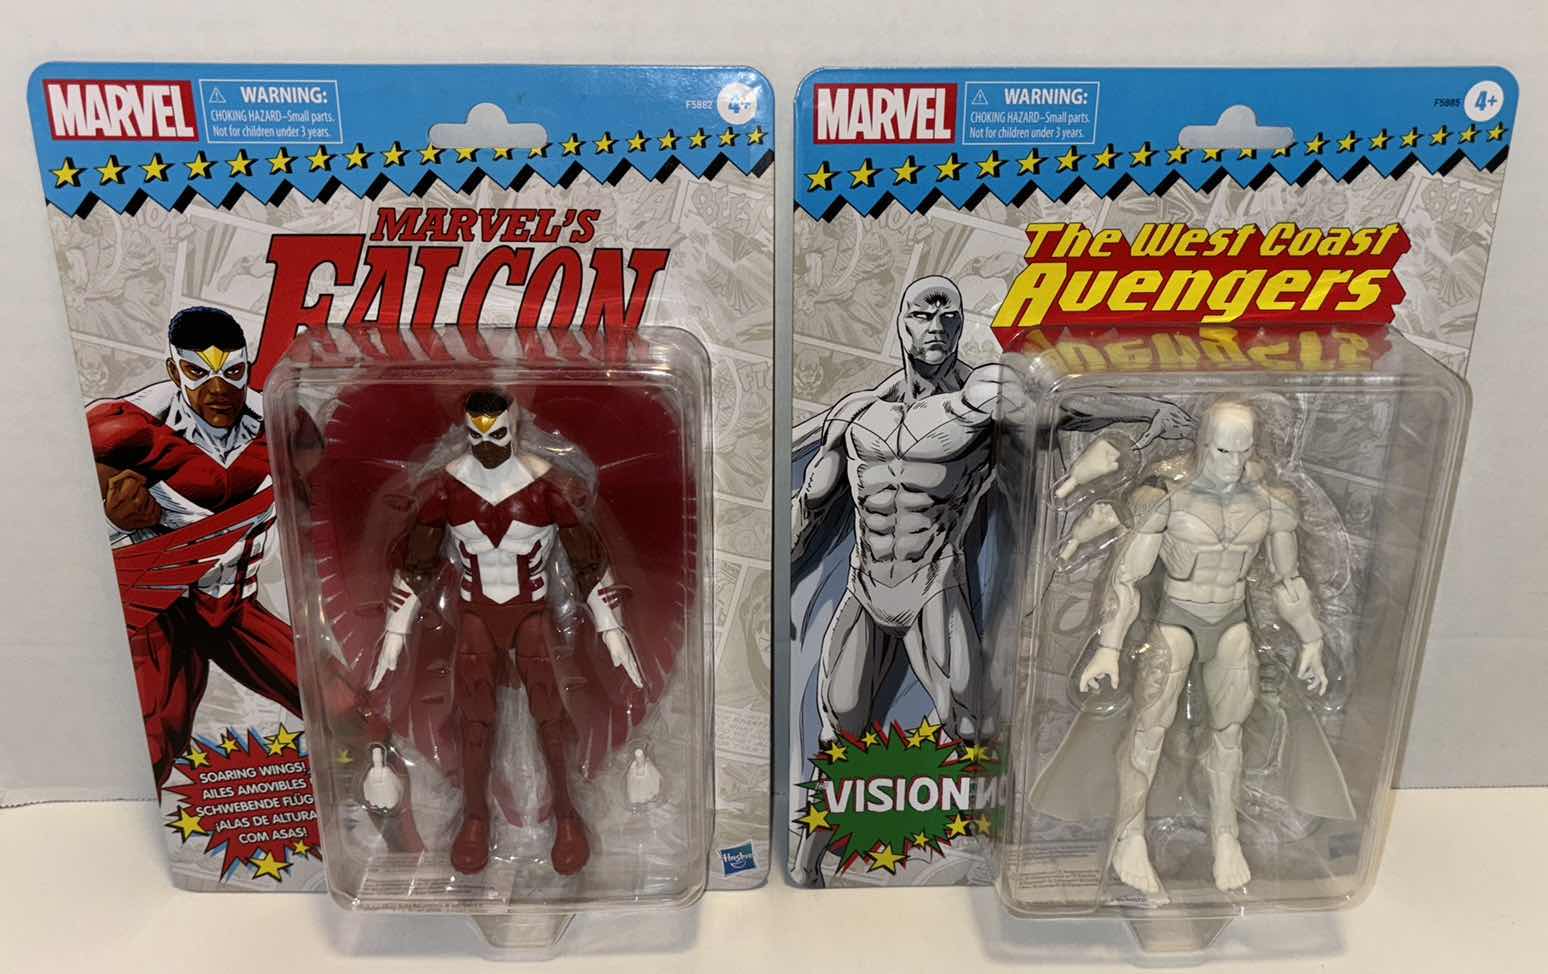 Photo 1 of NEW HASBRO MARVEL RETRO COLLECTION 2-PACK BUNDLE ACTION FIGURES & ACCESSORIES, “MARVEL’S FALCON” & “THE VISION”